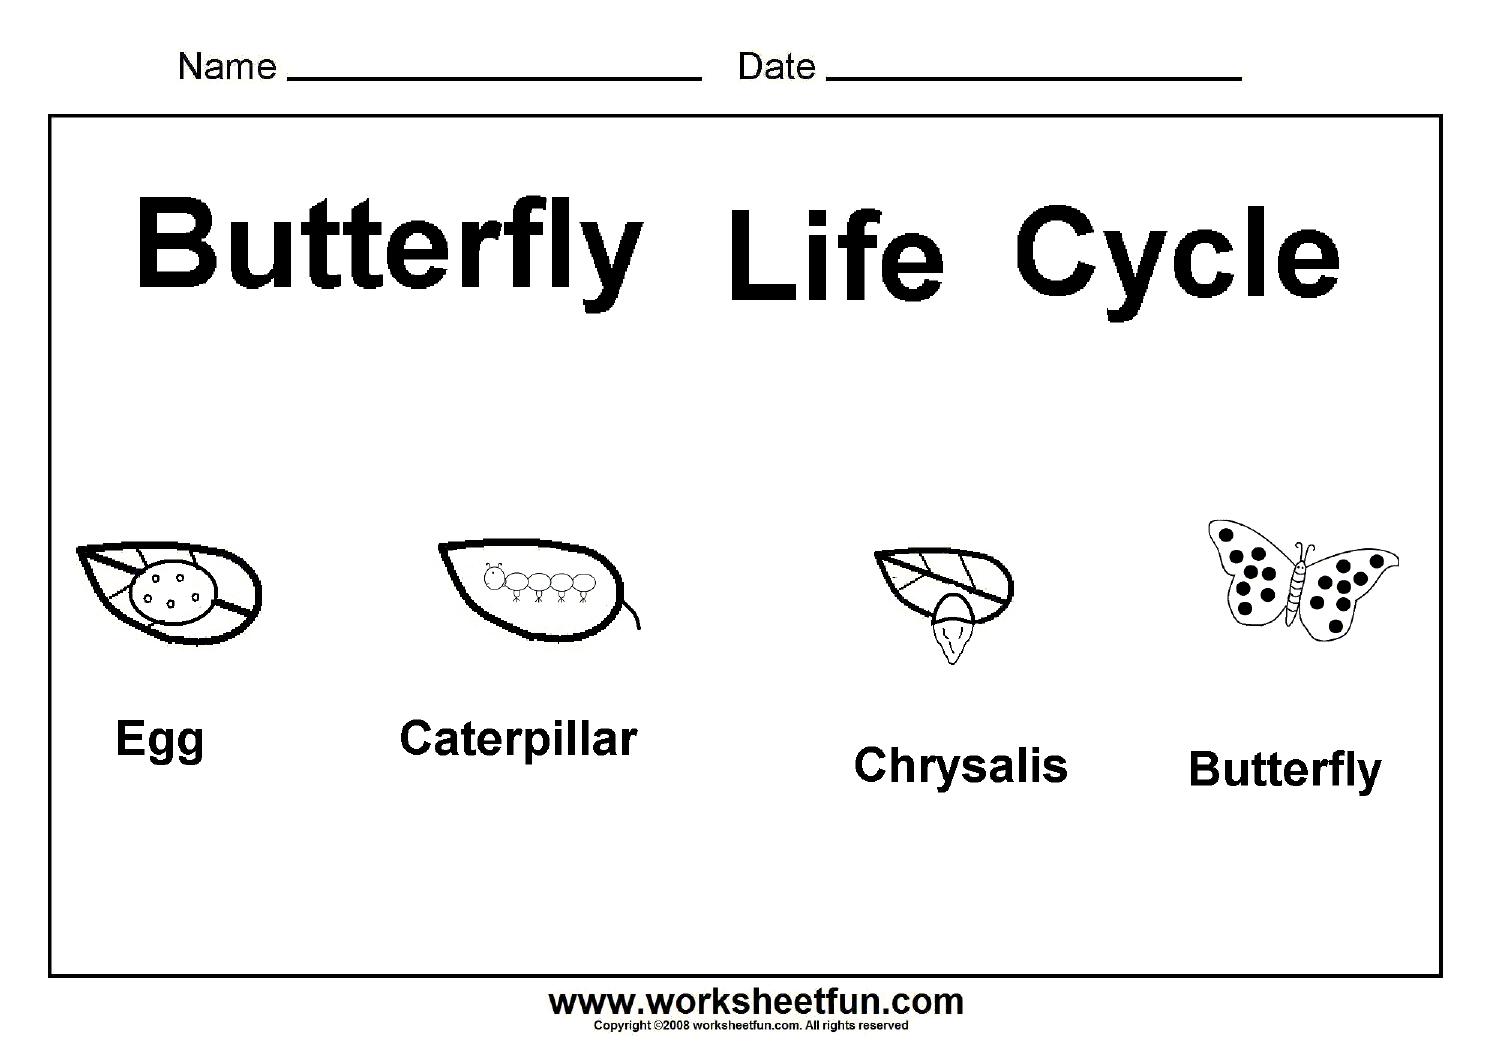 Worksheet : Butterfly Life Cycle One Free Printable Science - Free Printable Science Worksheets